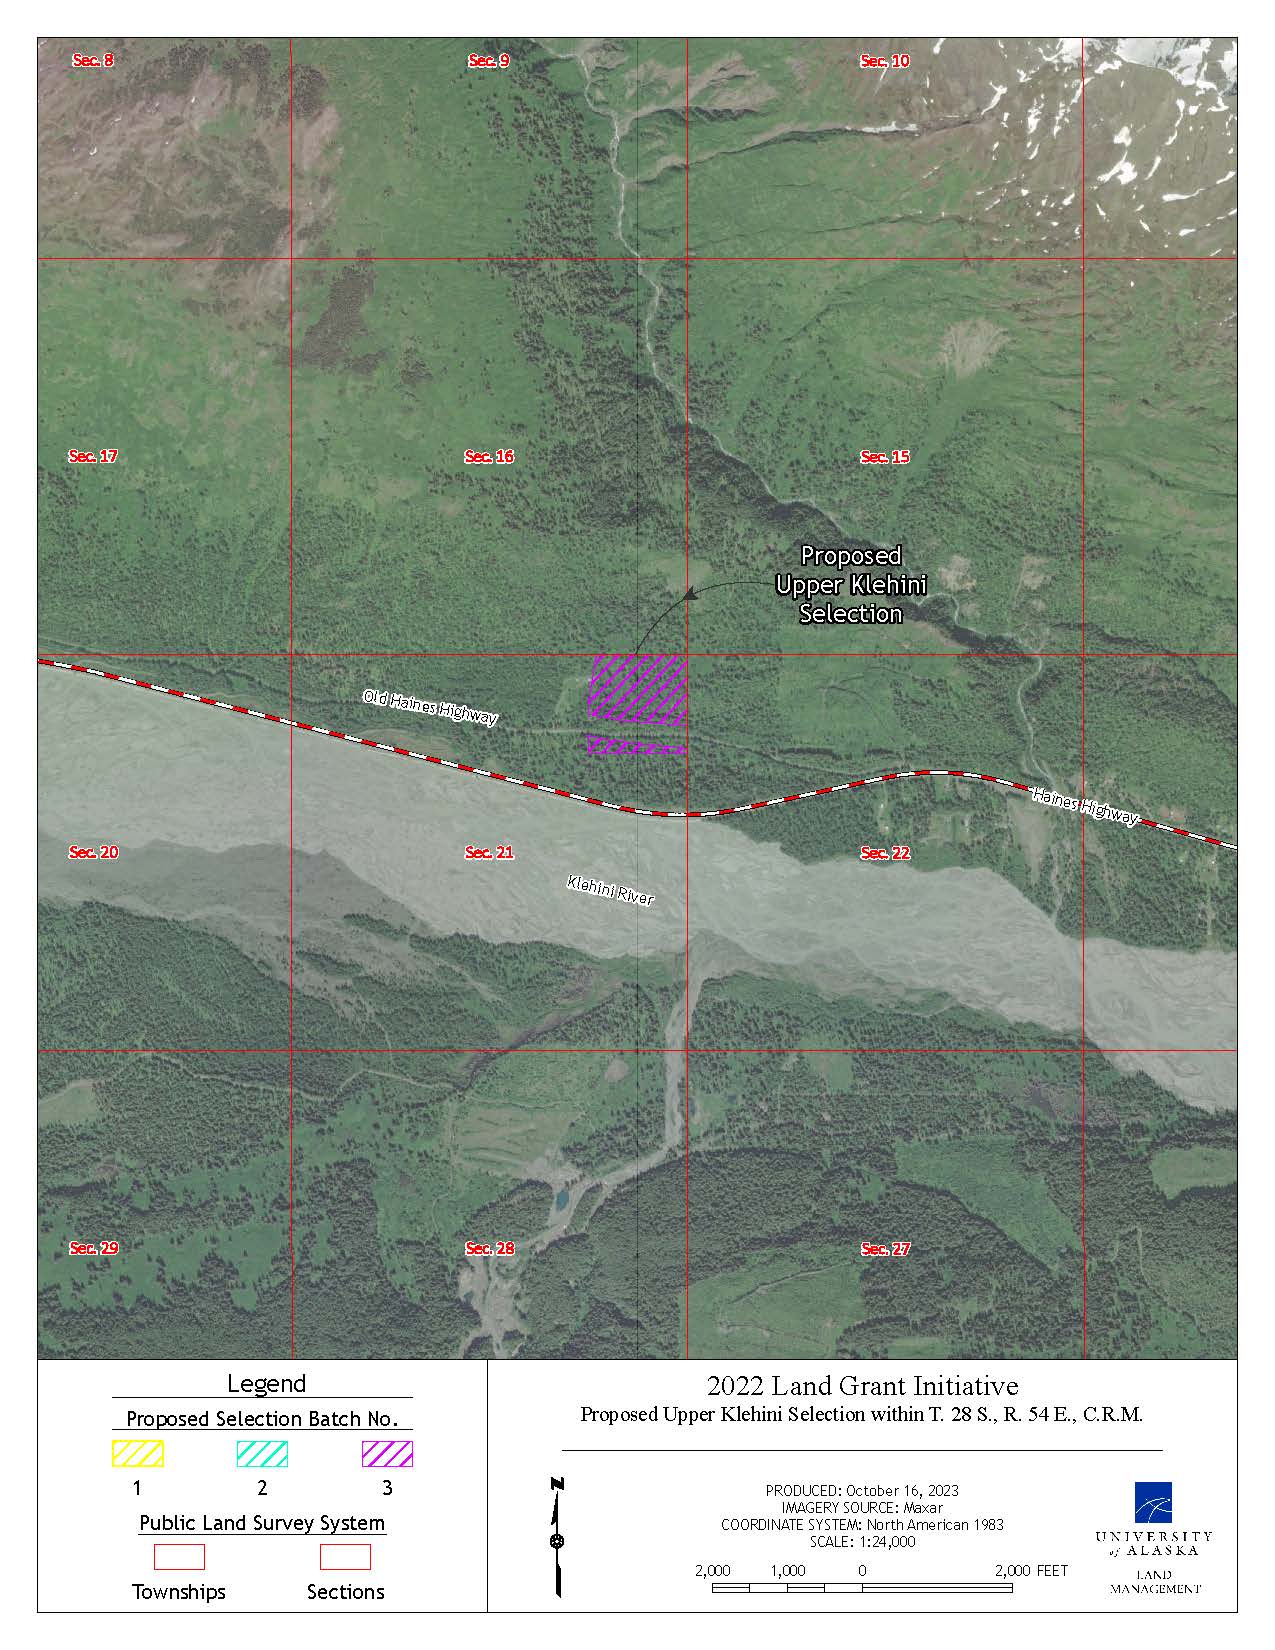 Map depicting the proposed selection of approximately 30 acres of the lands Old Haines Highway near Porcupine